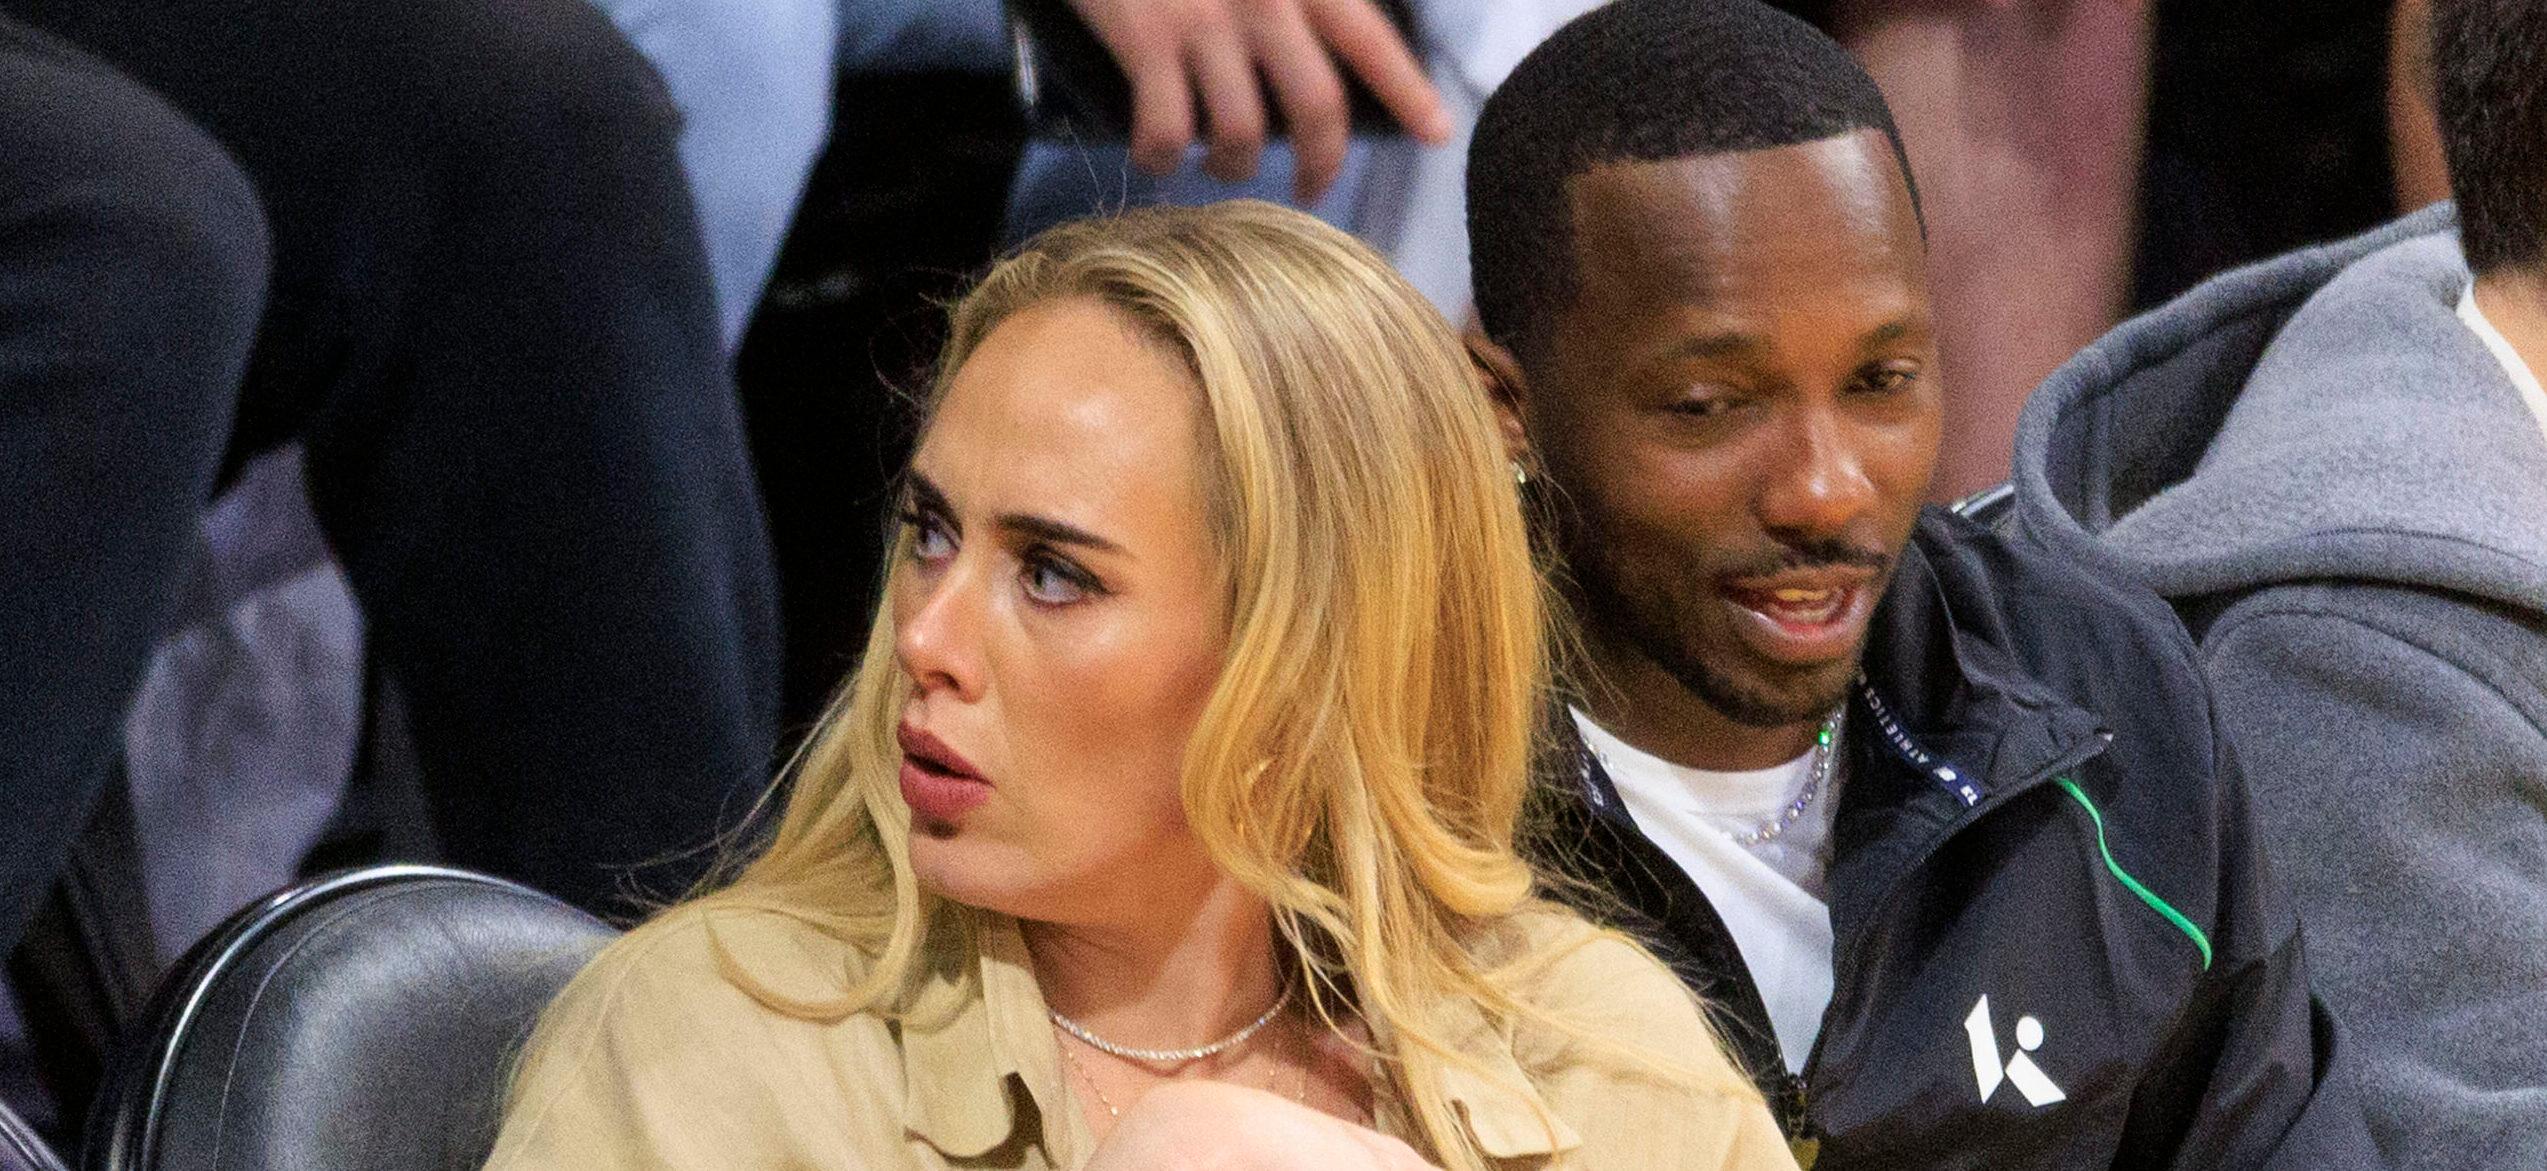 Adele Reportedly Made Rich Paul Sign Ironclad Prenup Before Alleged Secret Wedding